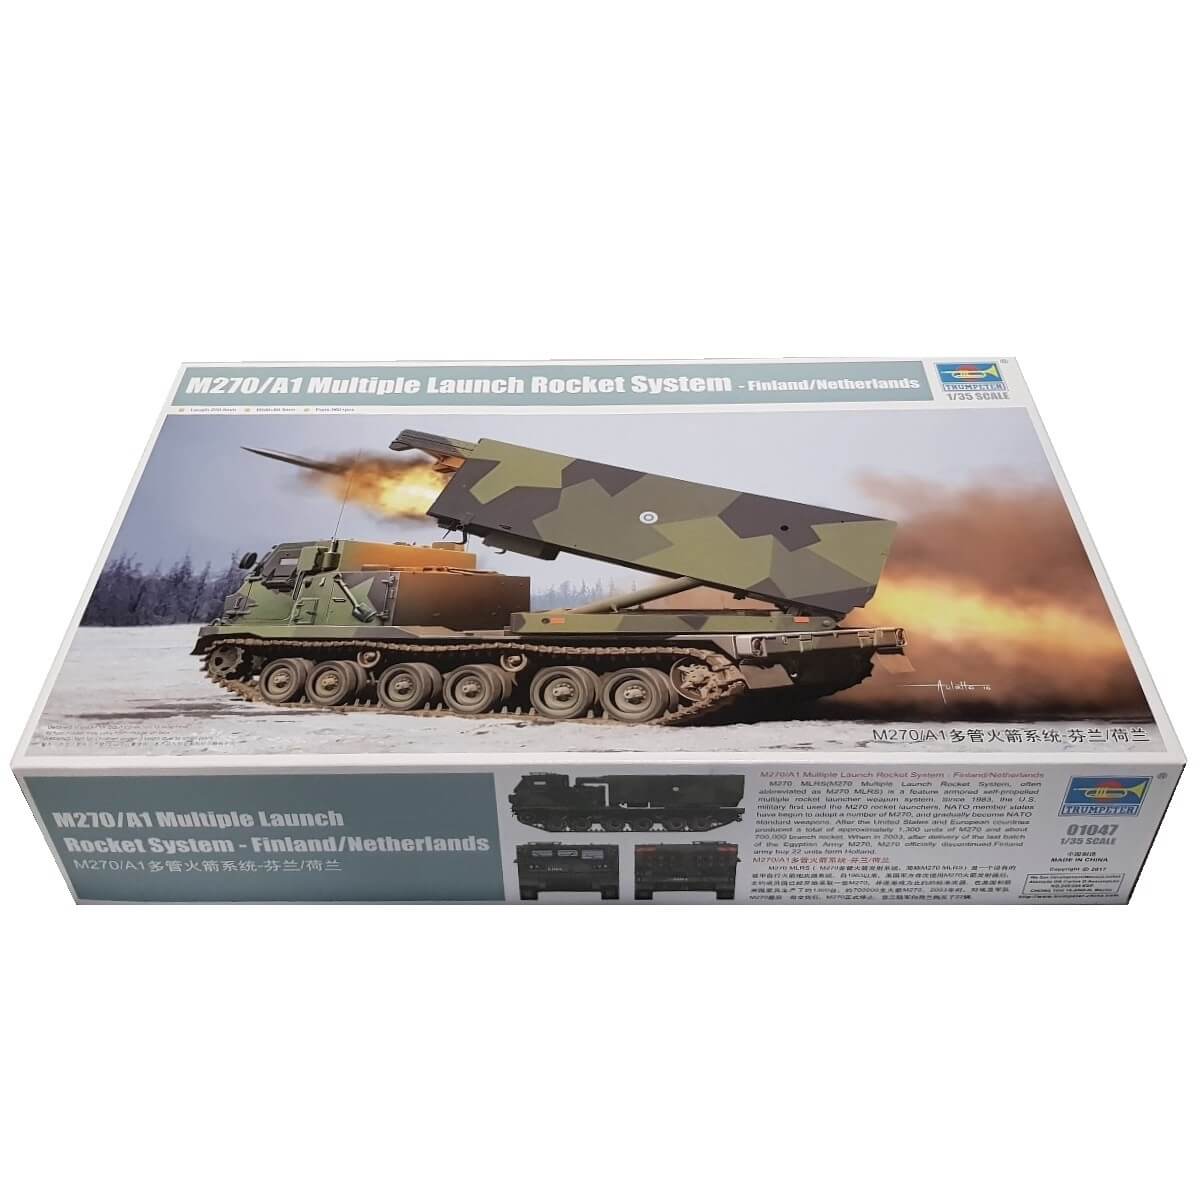 1:35 M270/A1 Multiple Launch Rocket System - Finland/Netherlands - TRUMPETER